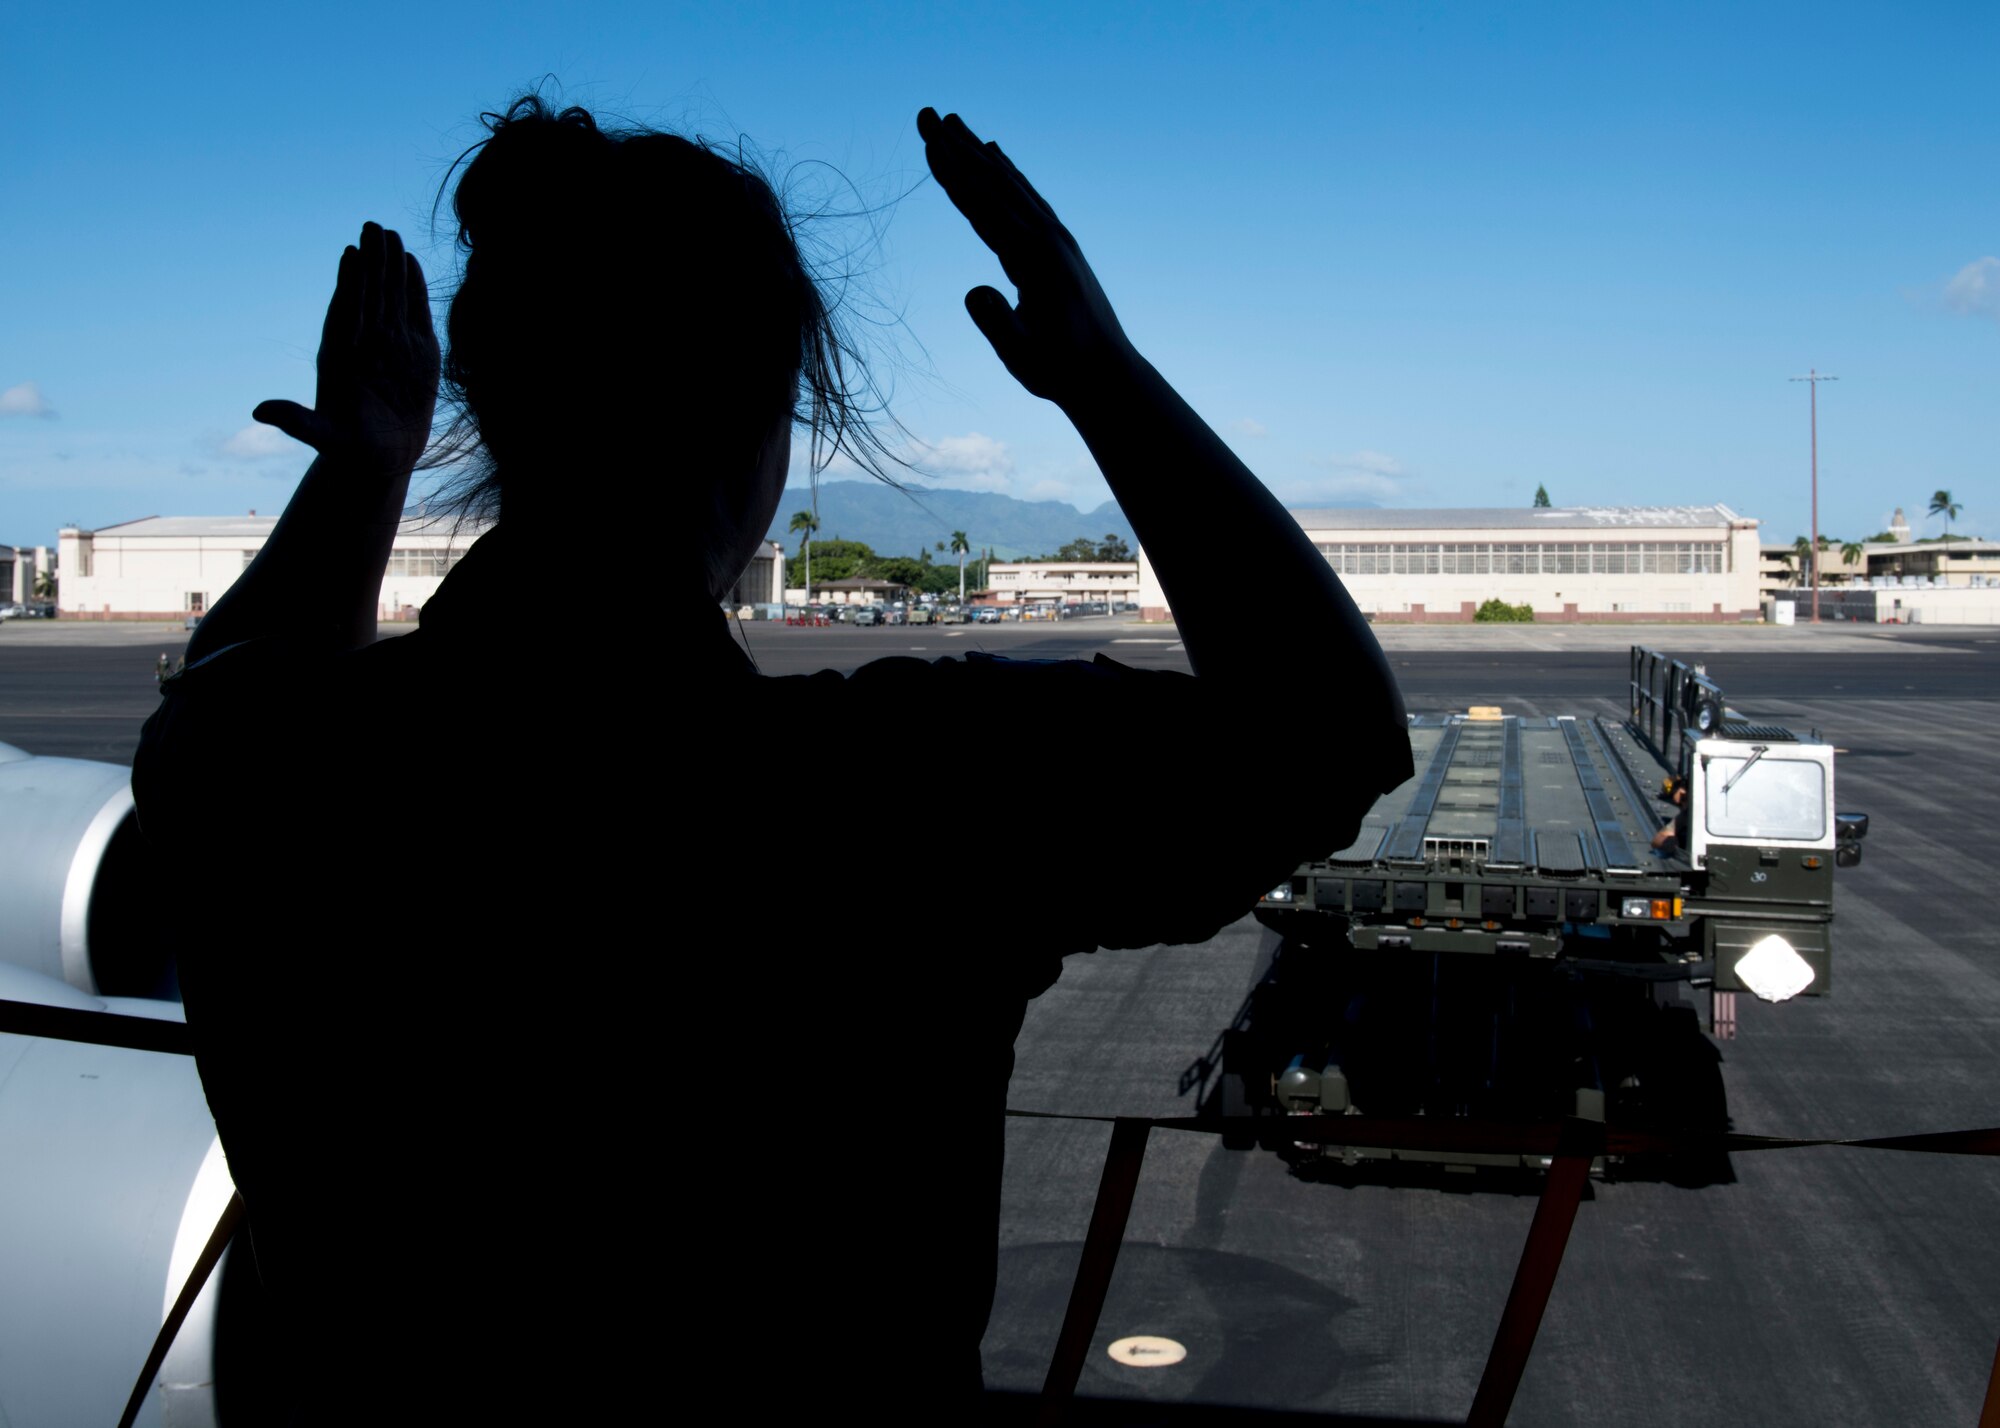 U.S. Air Force Airman 1st Class Allyson Molloy, 97th Air Refueling Squadron boom operator, guides a heavy cargo loader toward a KC-135 Stratotanker to load aeromedical evacuation supplies at Joint Base Pearl Harbor-Hickam, Hawaii, Nov. 10, 2020. Aeromedical evacuation is one the most important and challenging missions for aircrew, and can take place at anytime, anywhere.. (U.S. Air Force photo by Senior Airman Lawrence Sena)